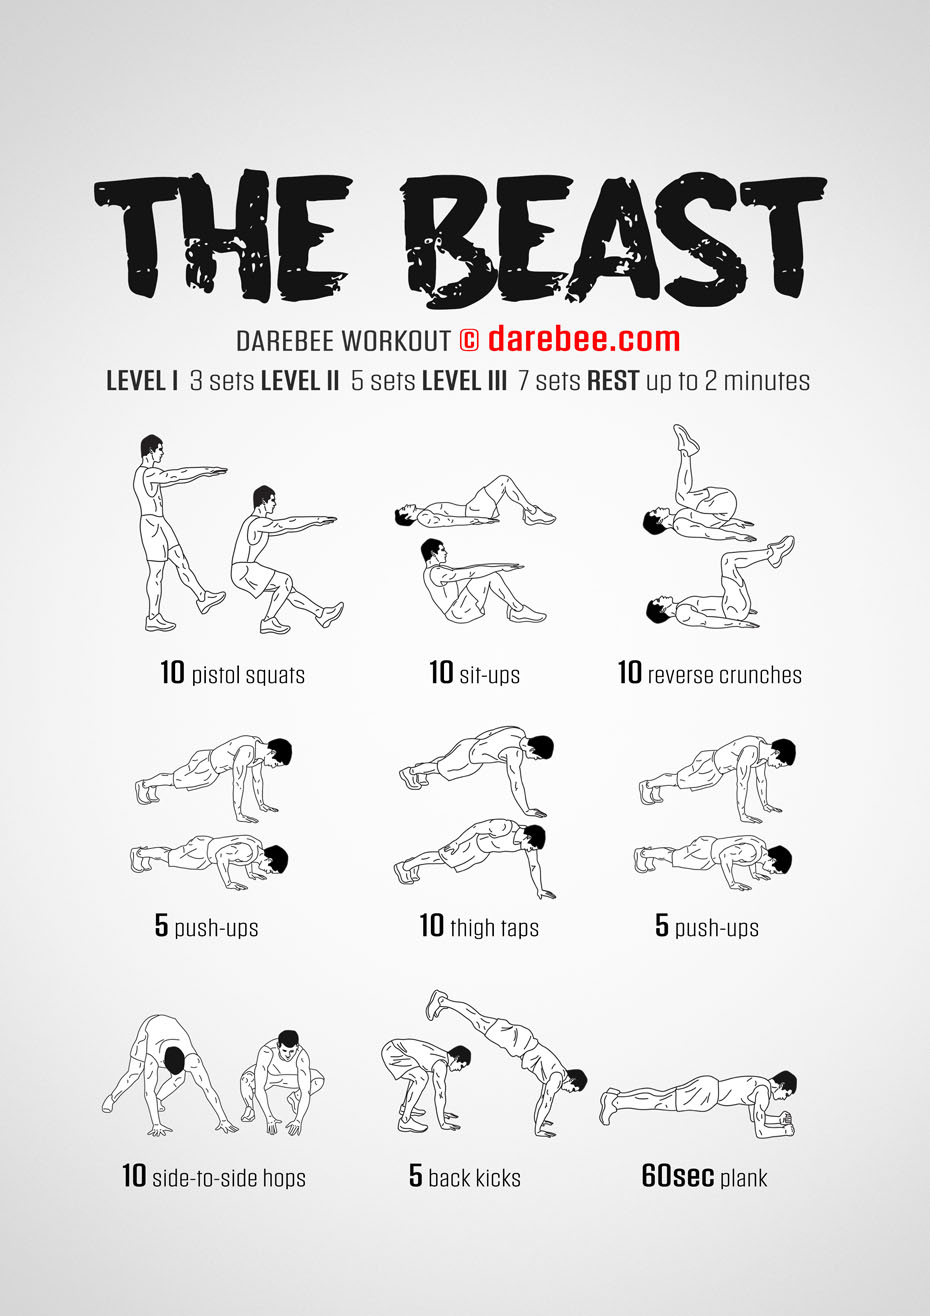 15 Minute The Beast Workout Plan for Beginner